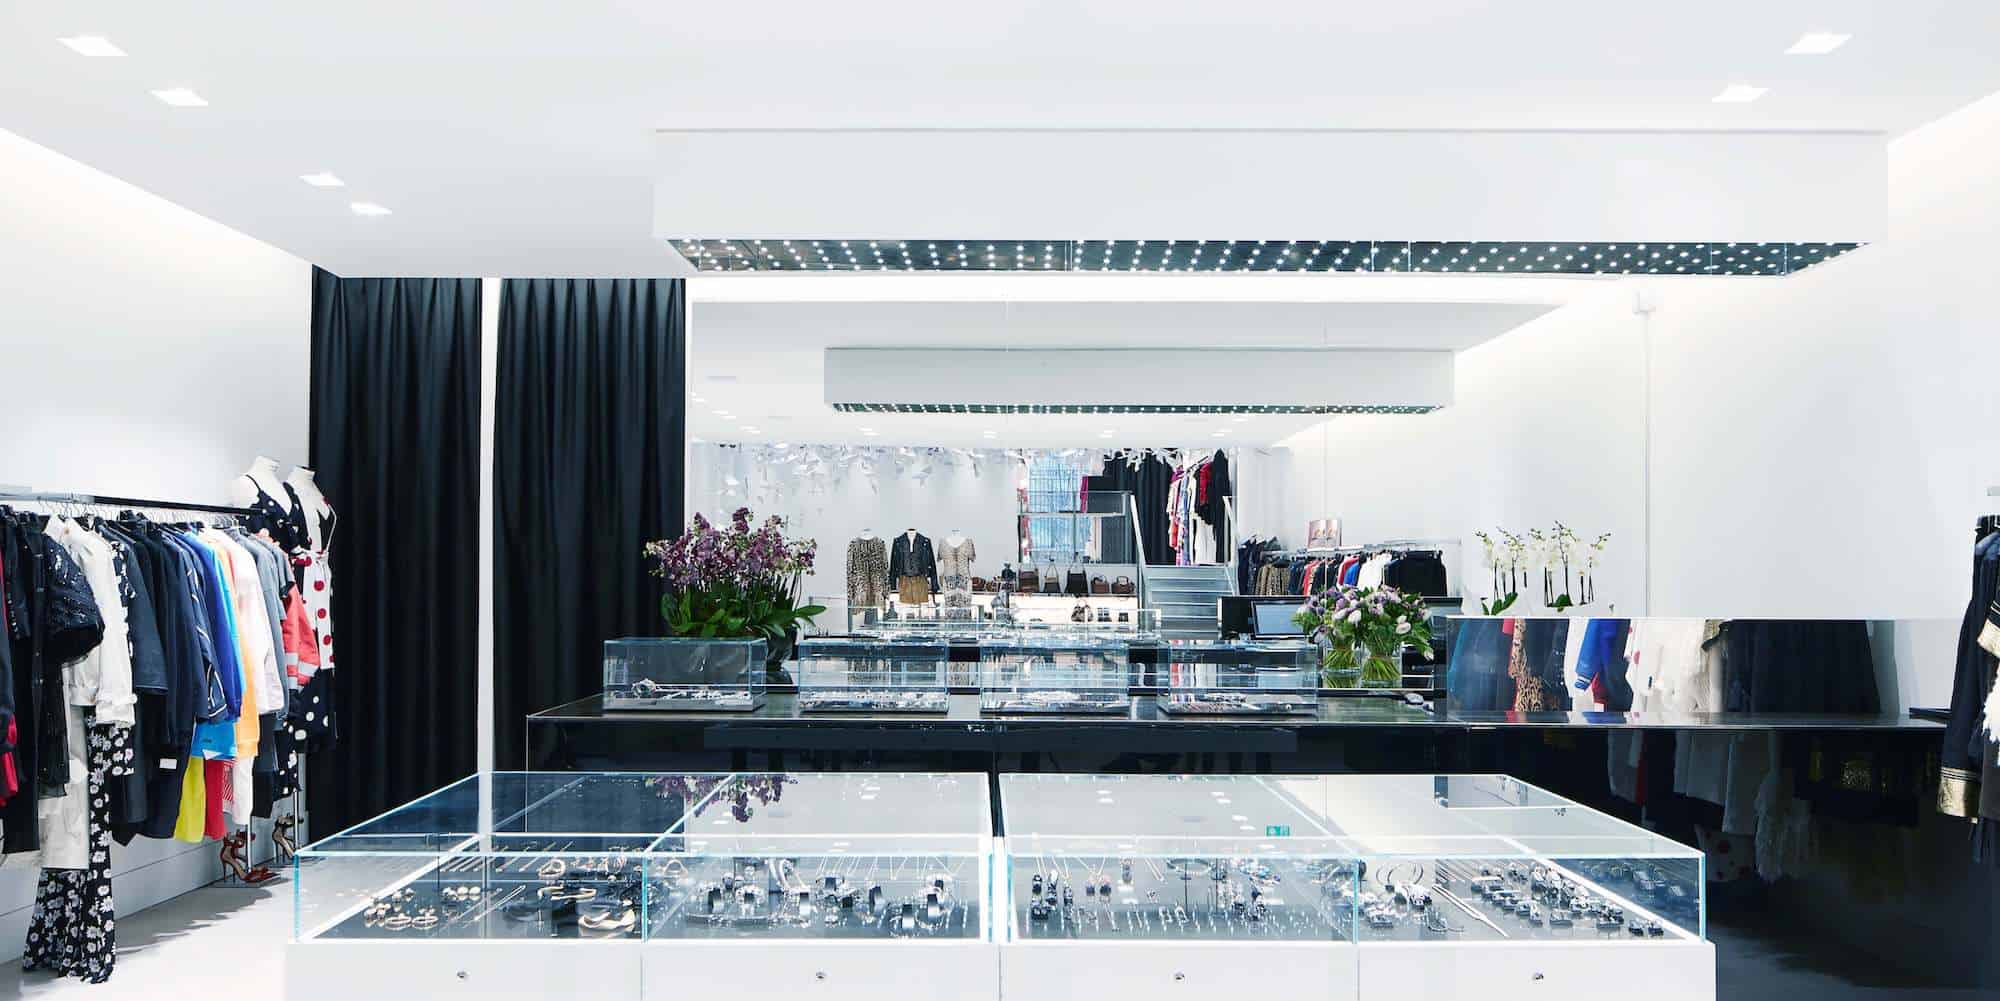 Montainge Market took over the space of popular Paris concept store Colette, and has a pointed jewelry selection, including pieces from Lynn Ban and former French ELLE editor Marie Lichtenberg.